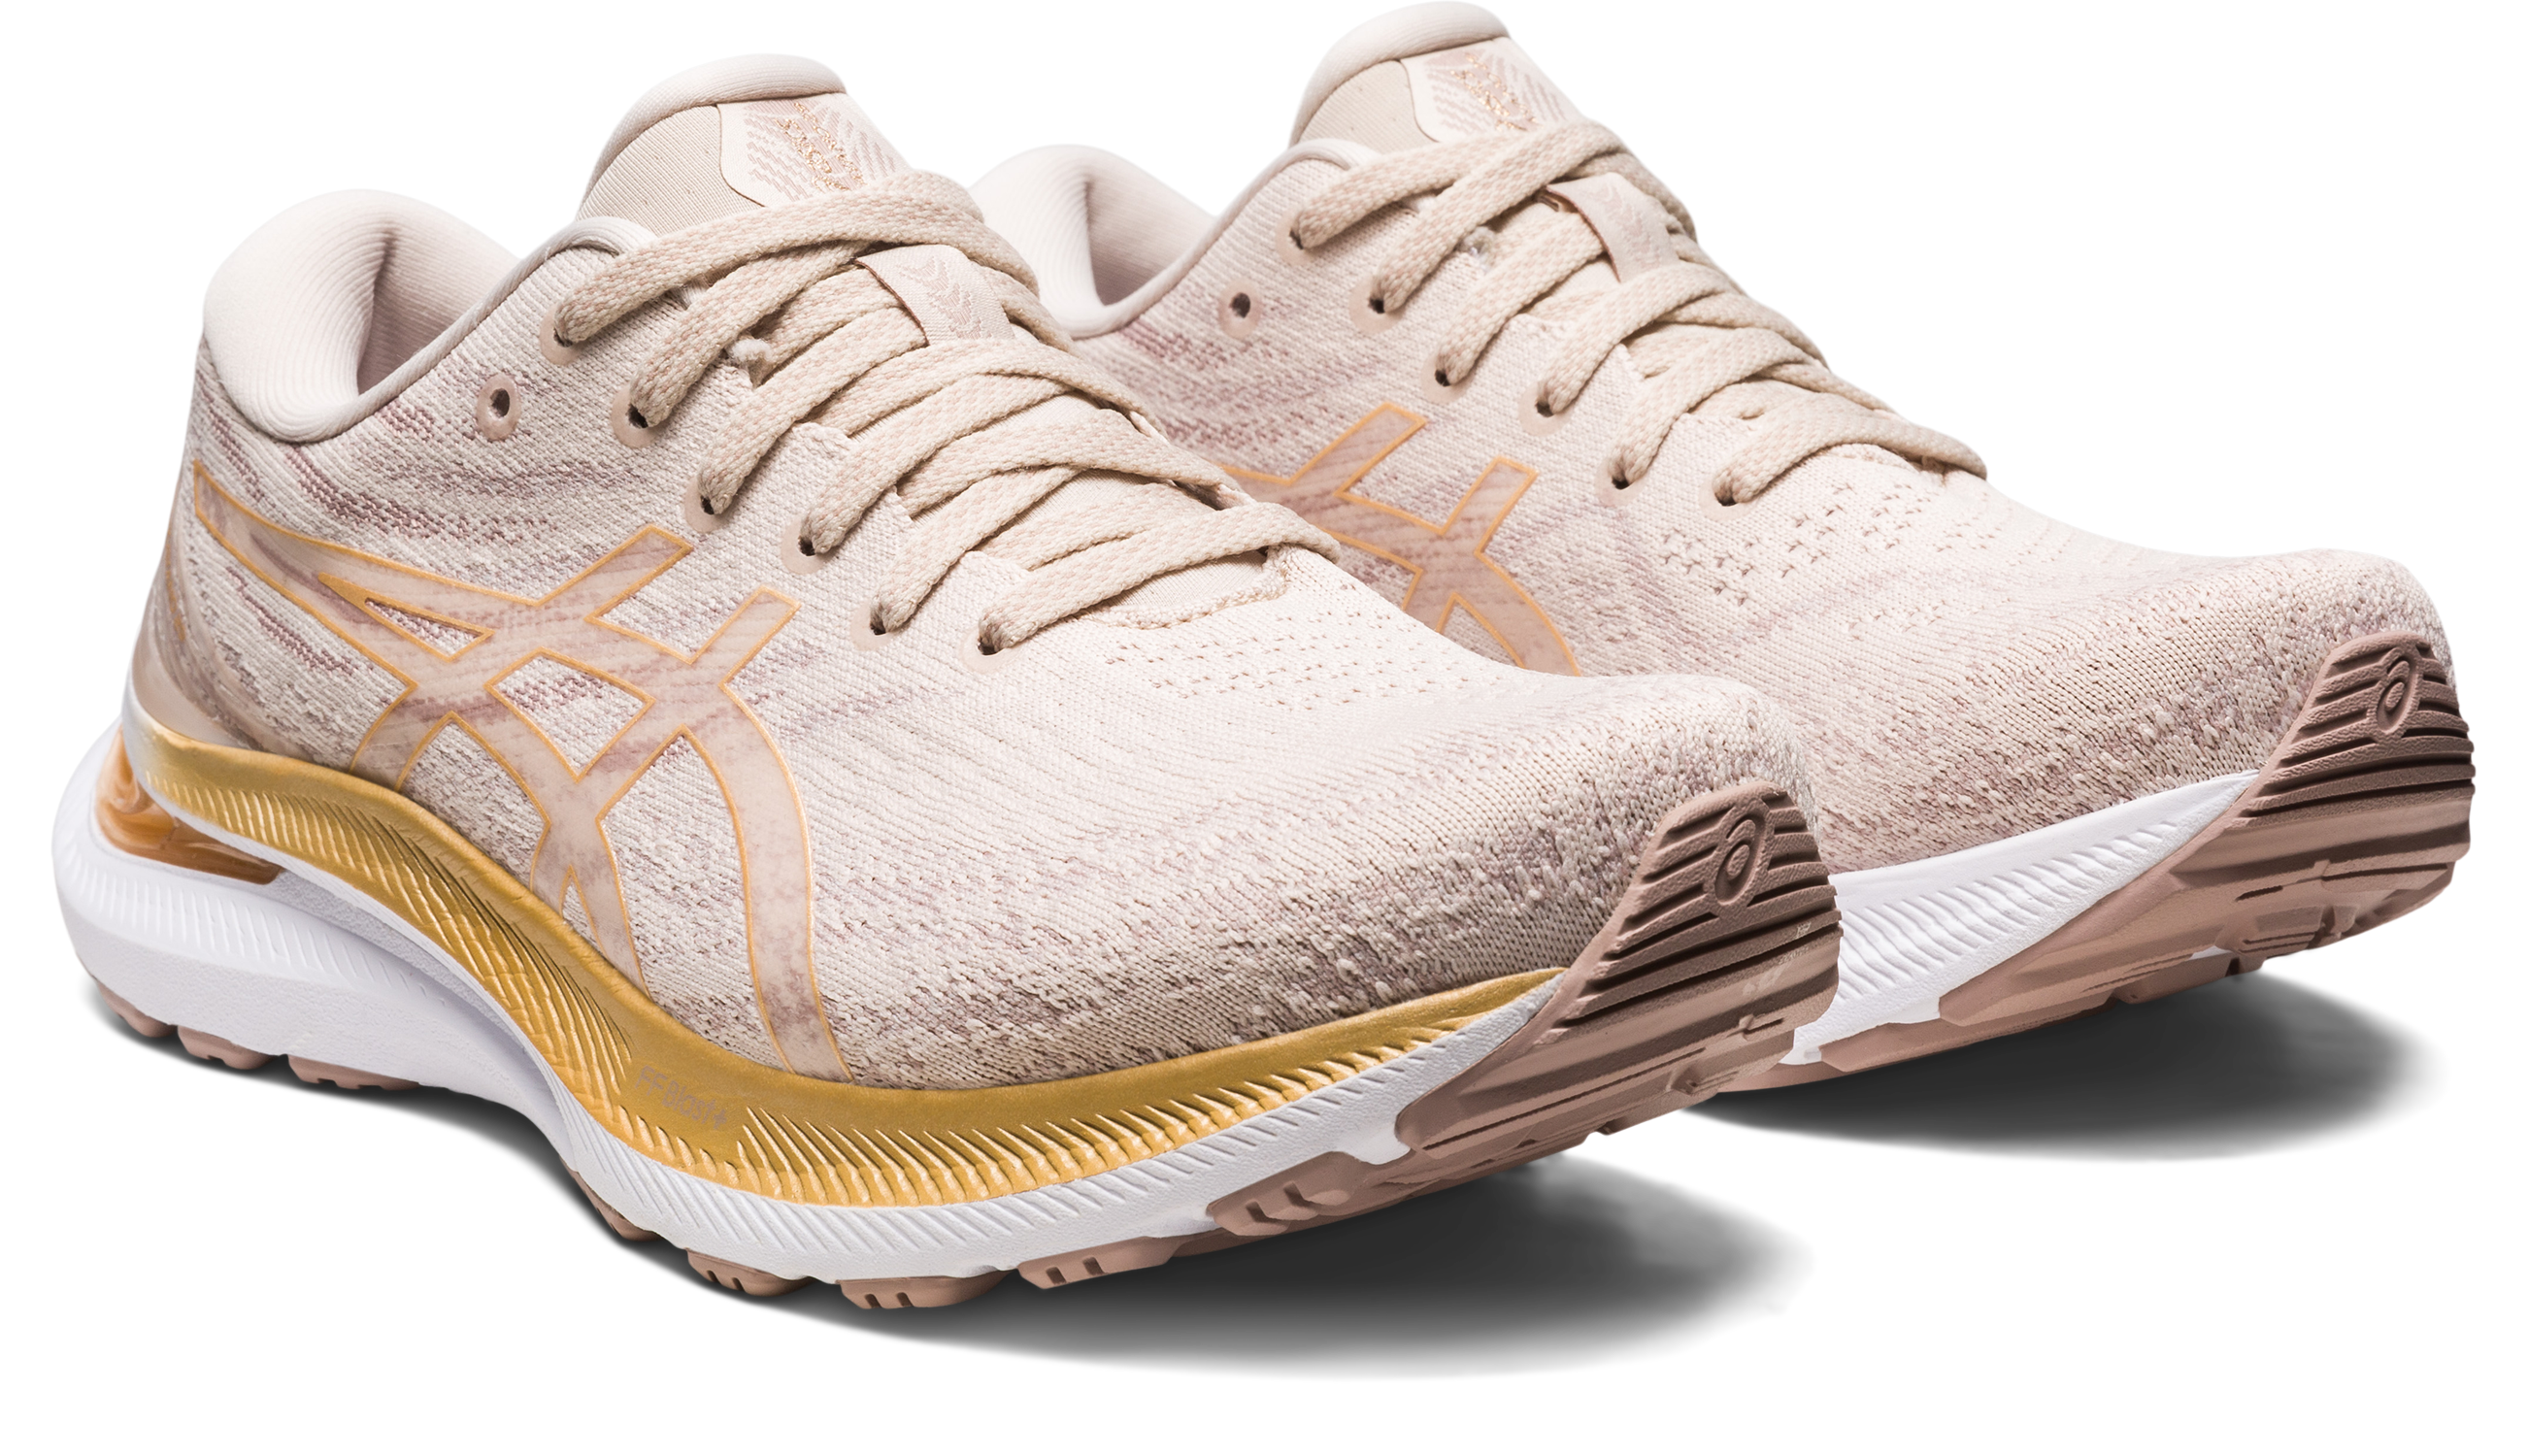 Asics Women's Gel-Kayano 29 Running Shoes in Mineral Beige/Champagne